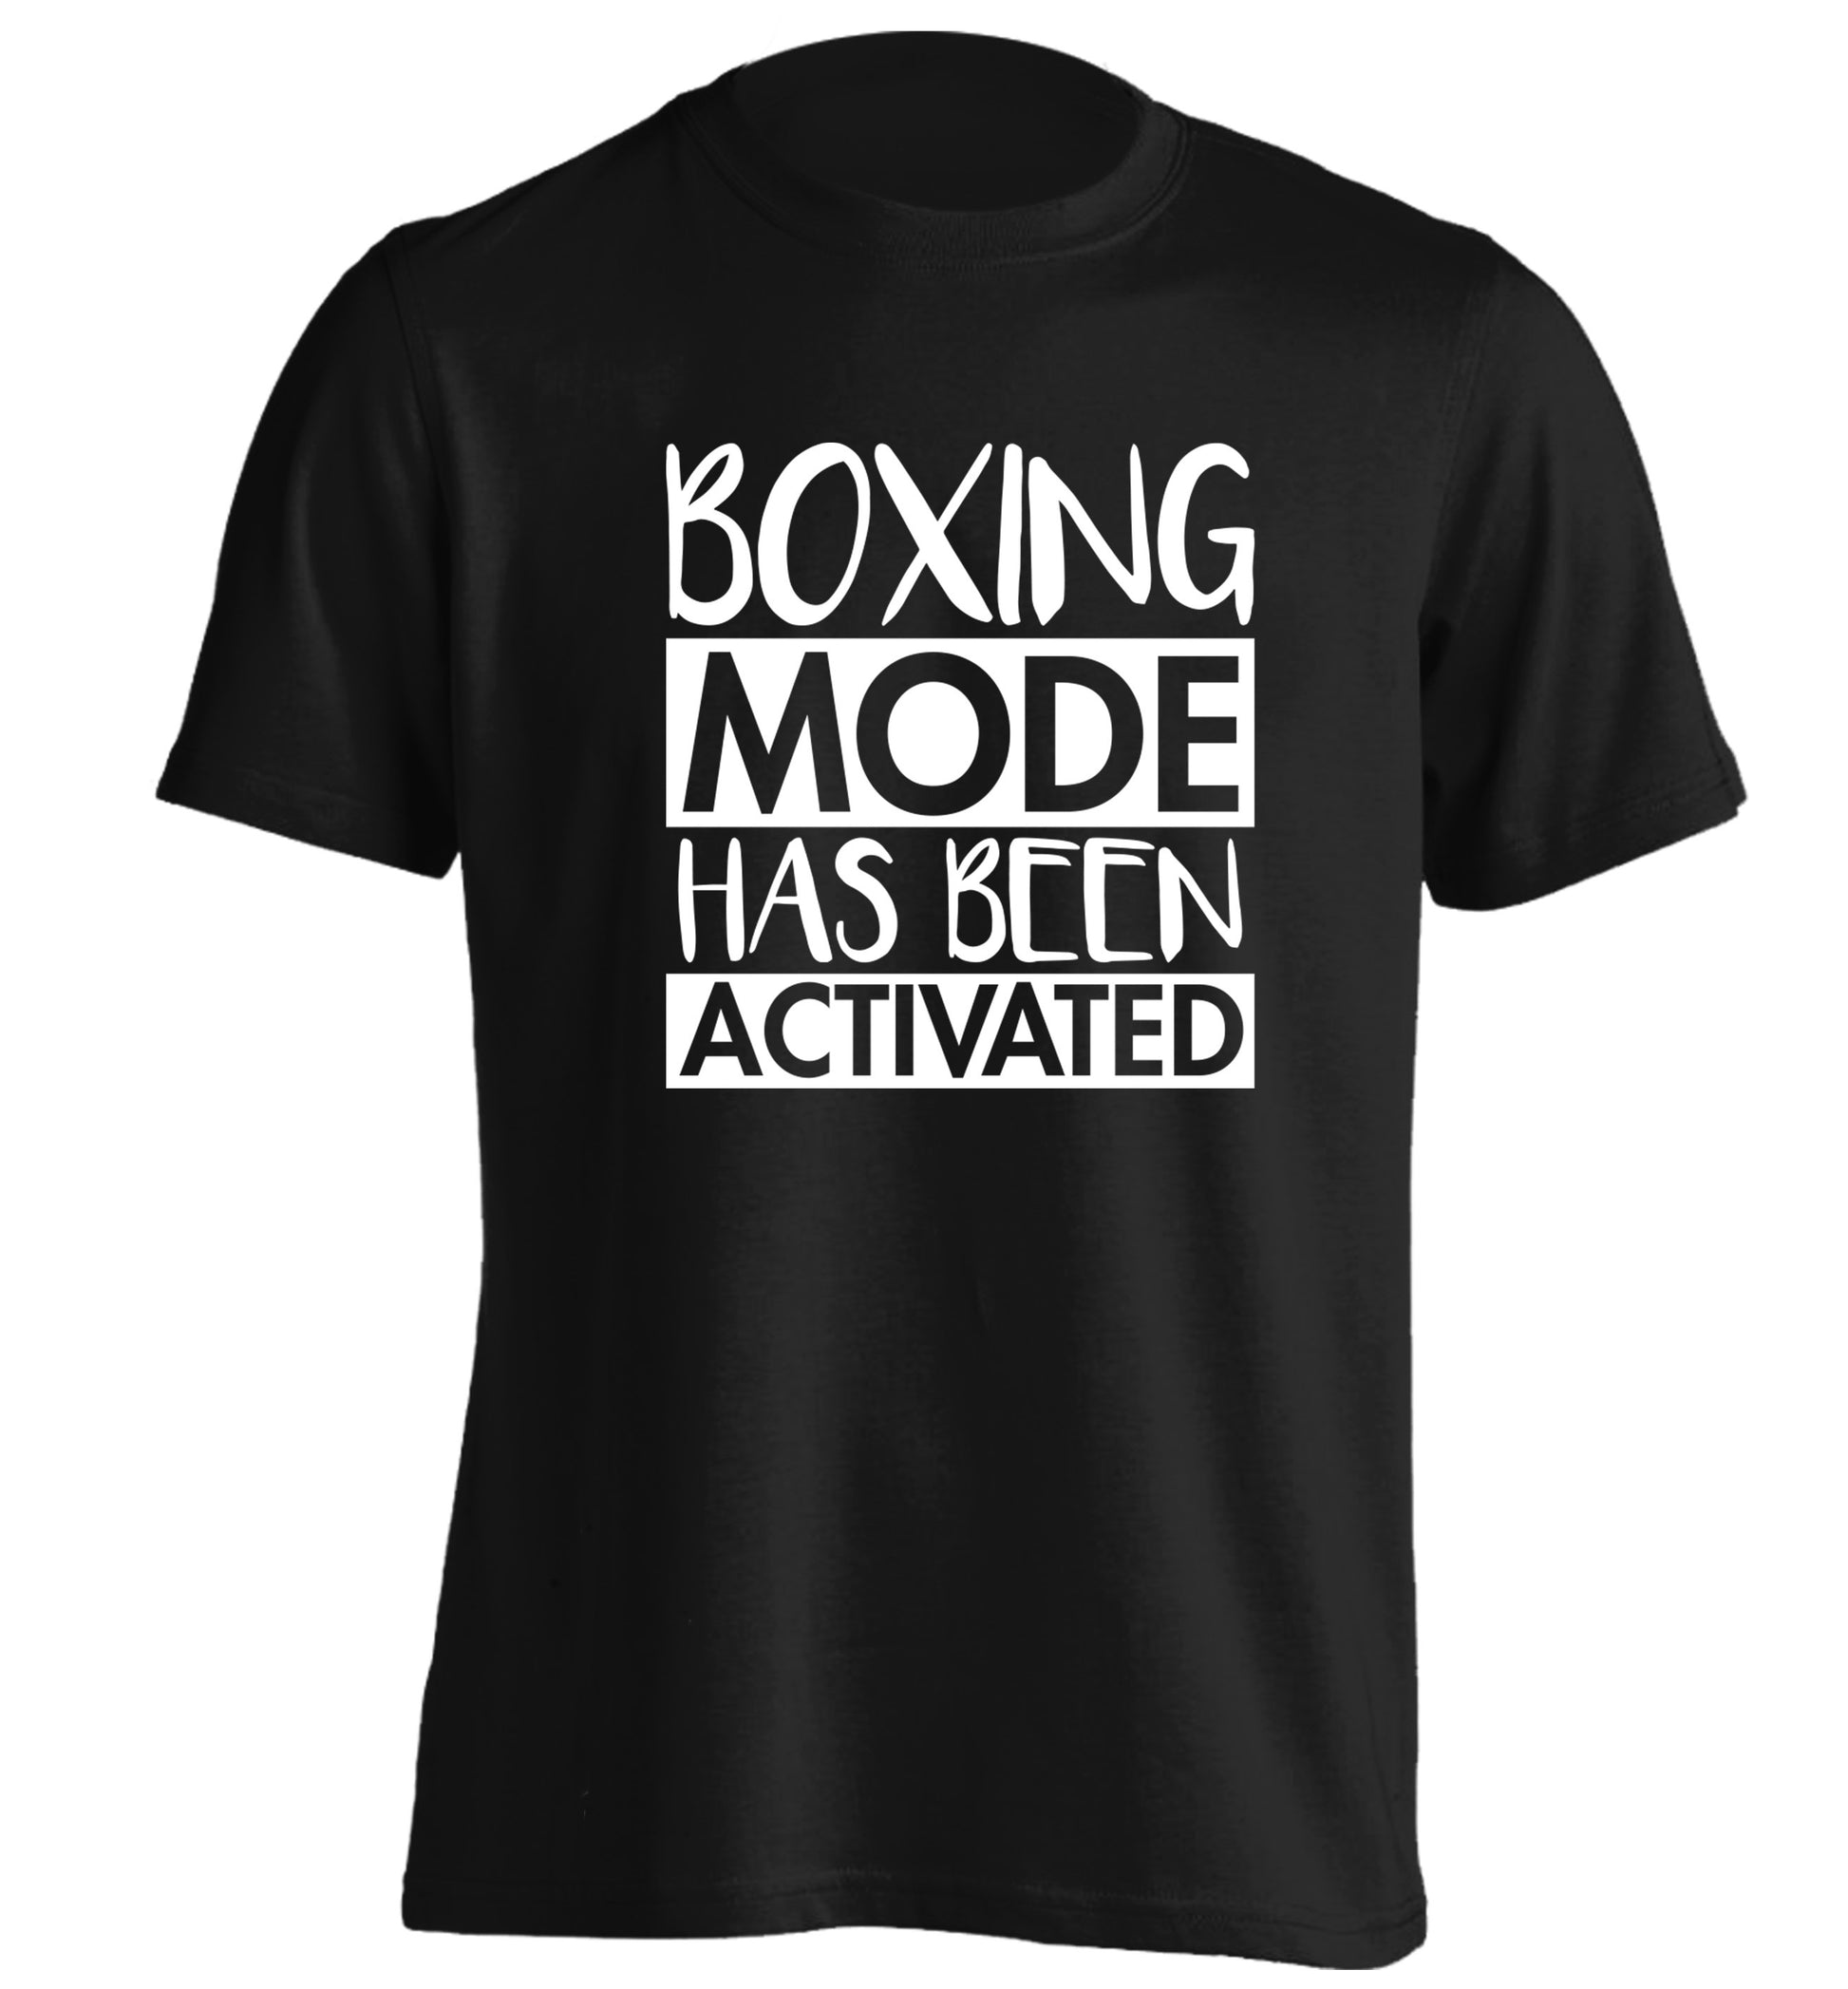 Boxing mode activated adults unisex black Tshirt 2XL